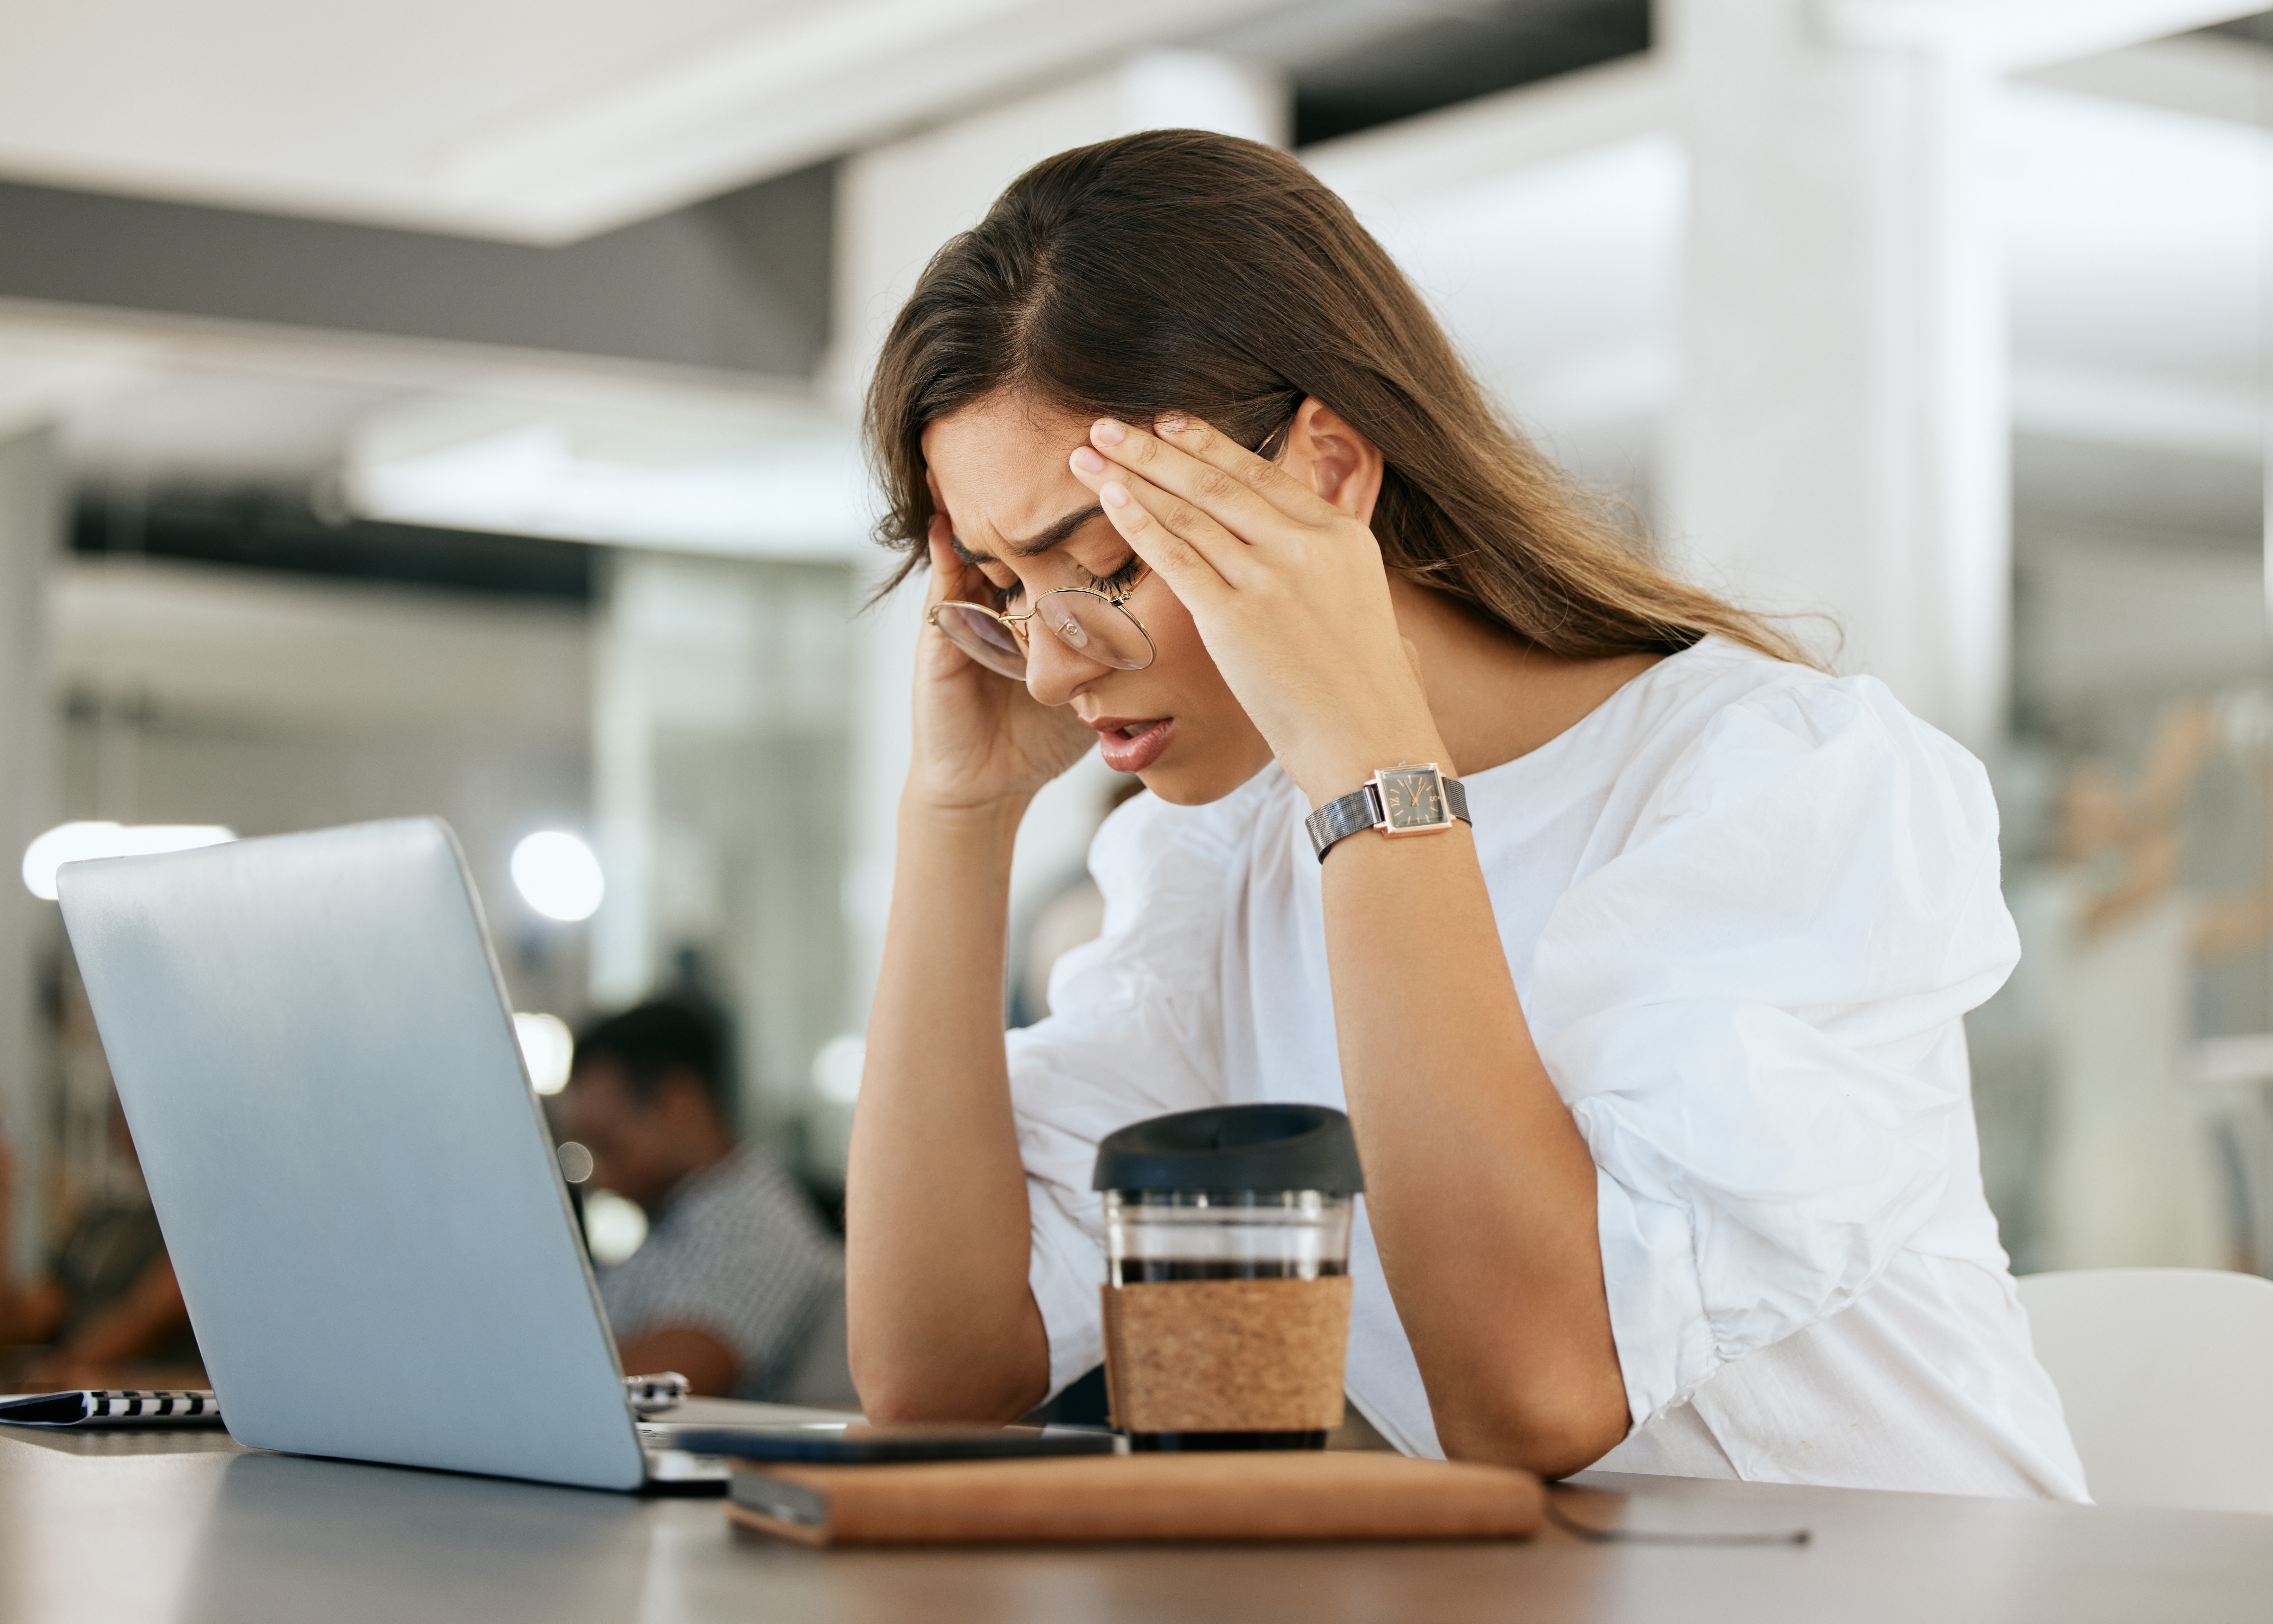 How to manage workplace anxiety